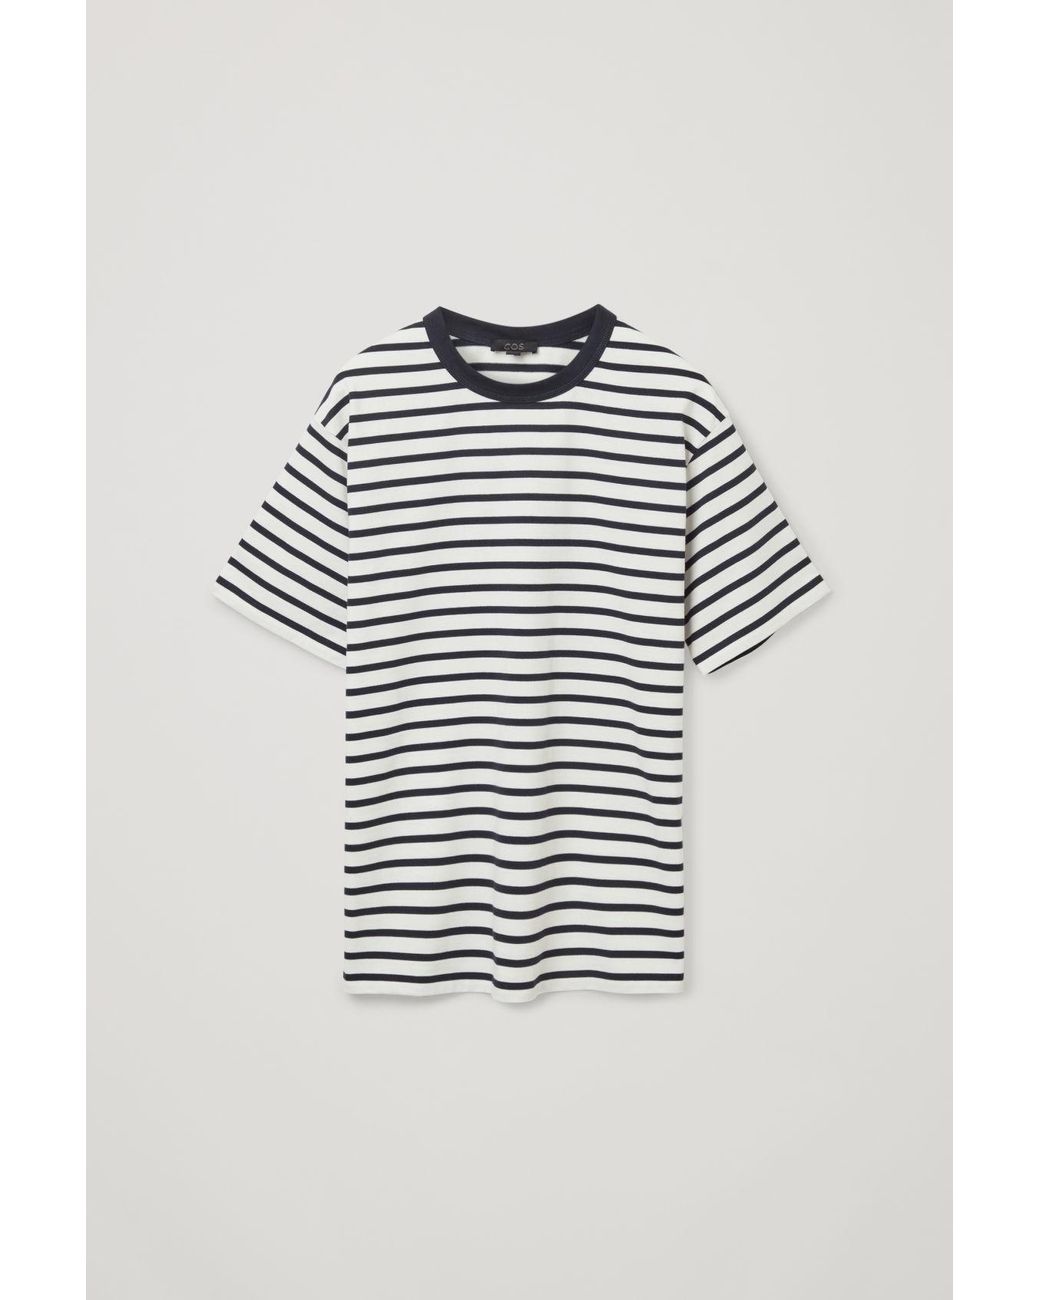 COS Cotton Relaxed-fit Striped T-shirt in Blue for Men - Lyst